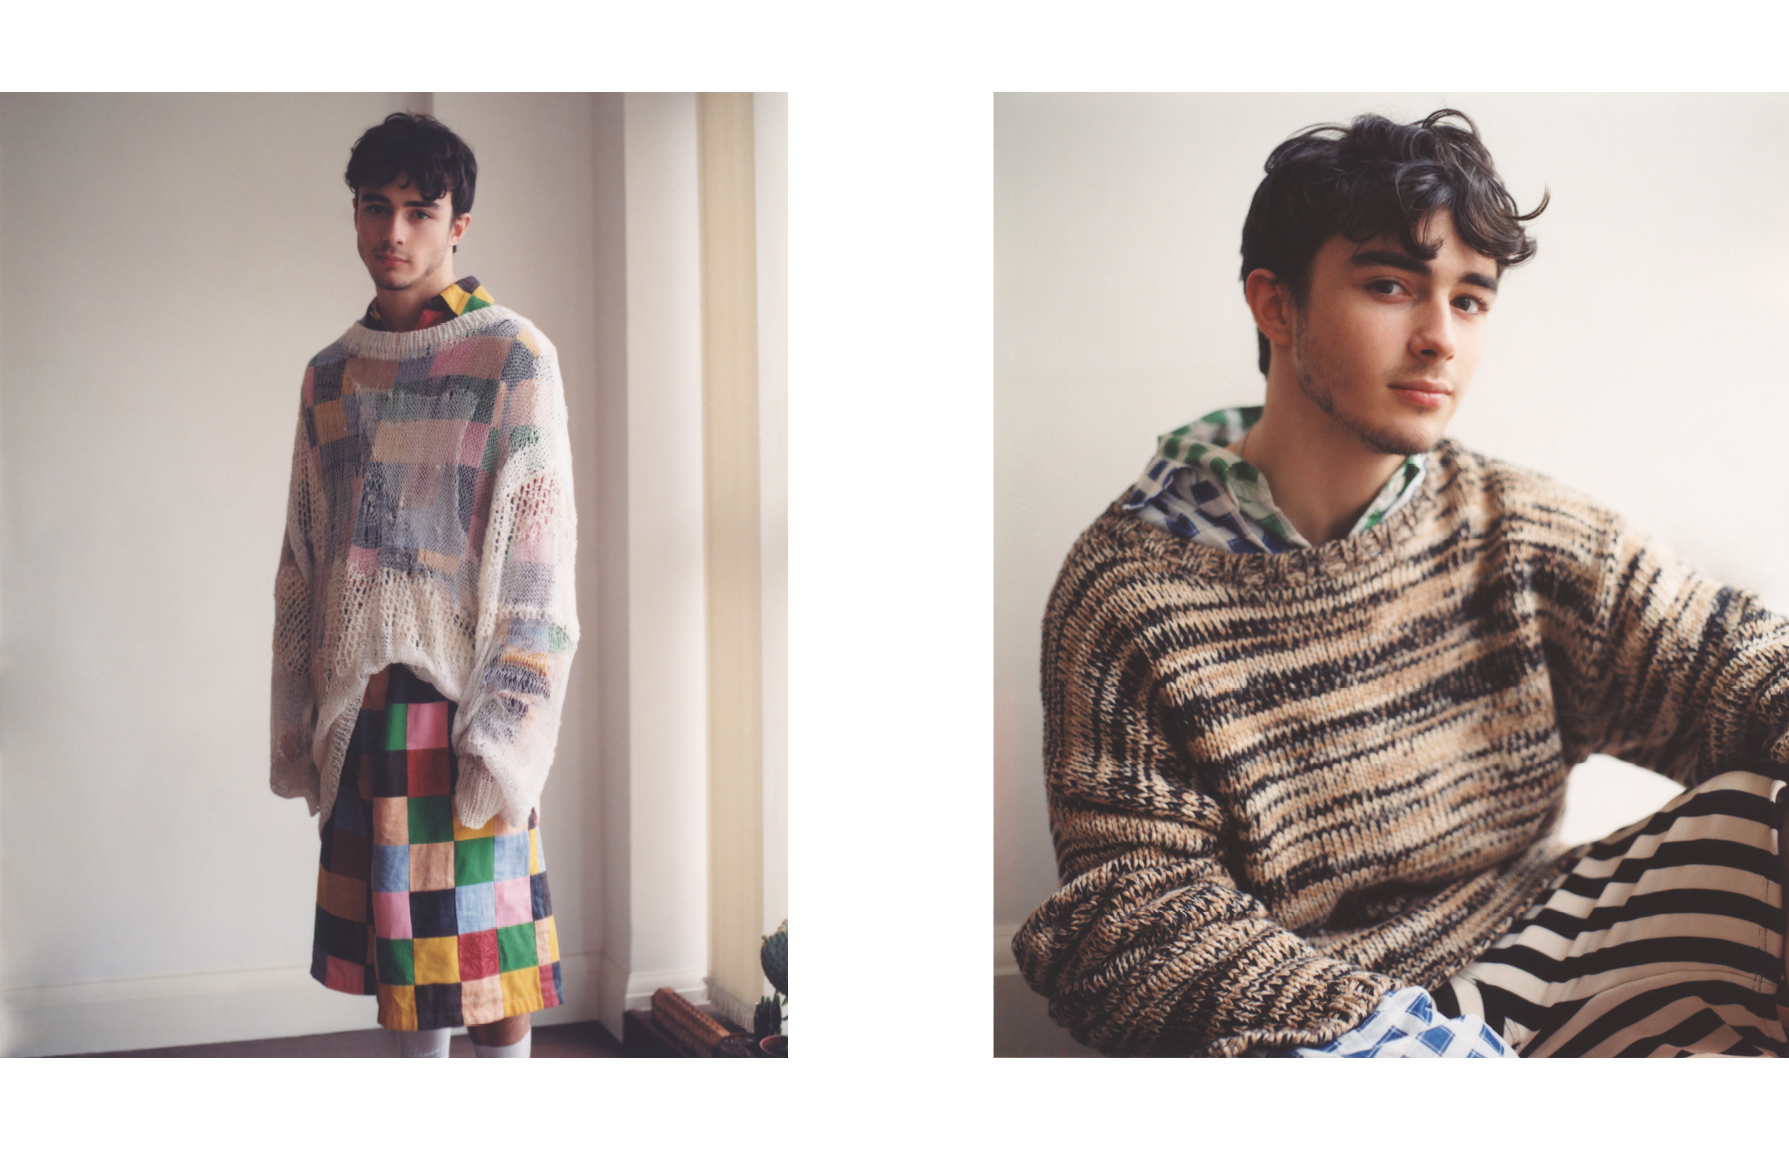 Left: Sweater by Christian Dada. Shirt and shorts by Loewe.Right: Sweater by Joseph. Shirts and shorts by Marni.